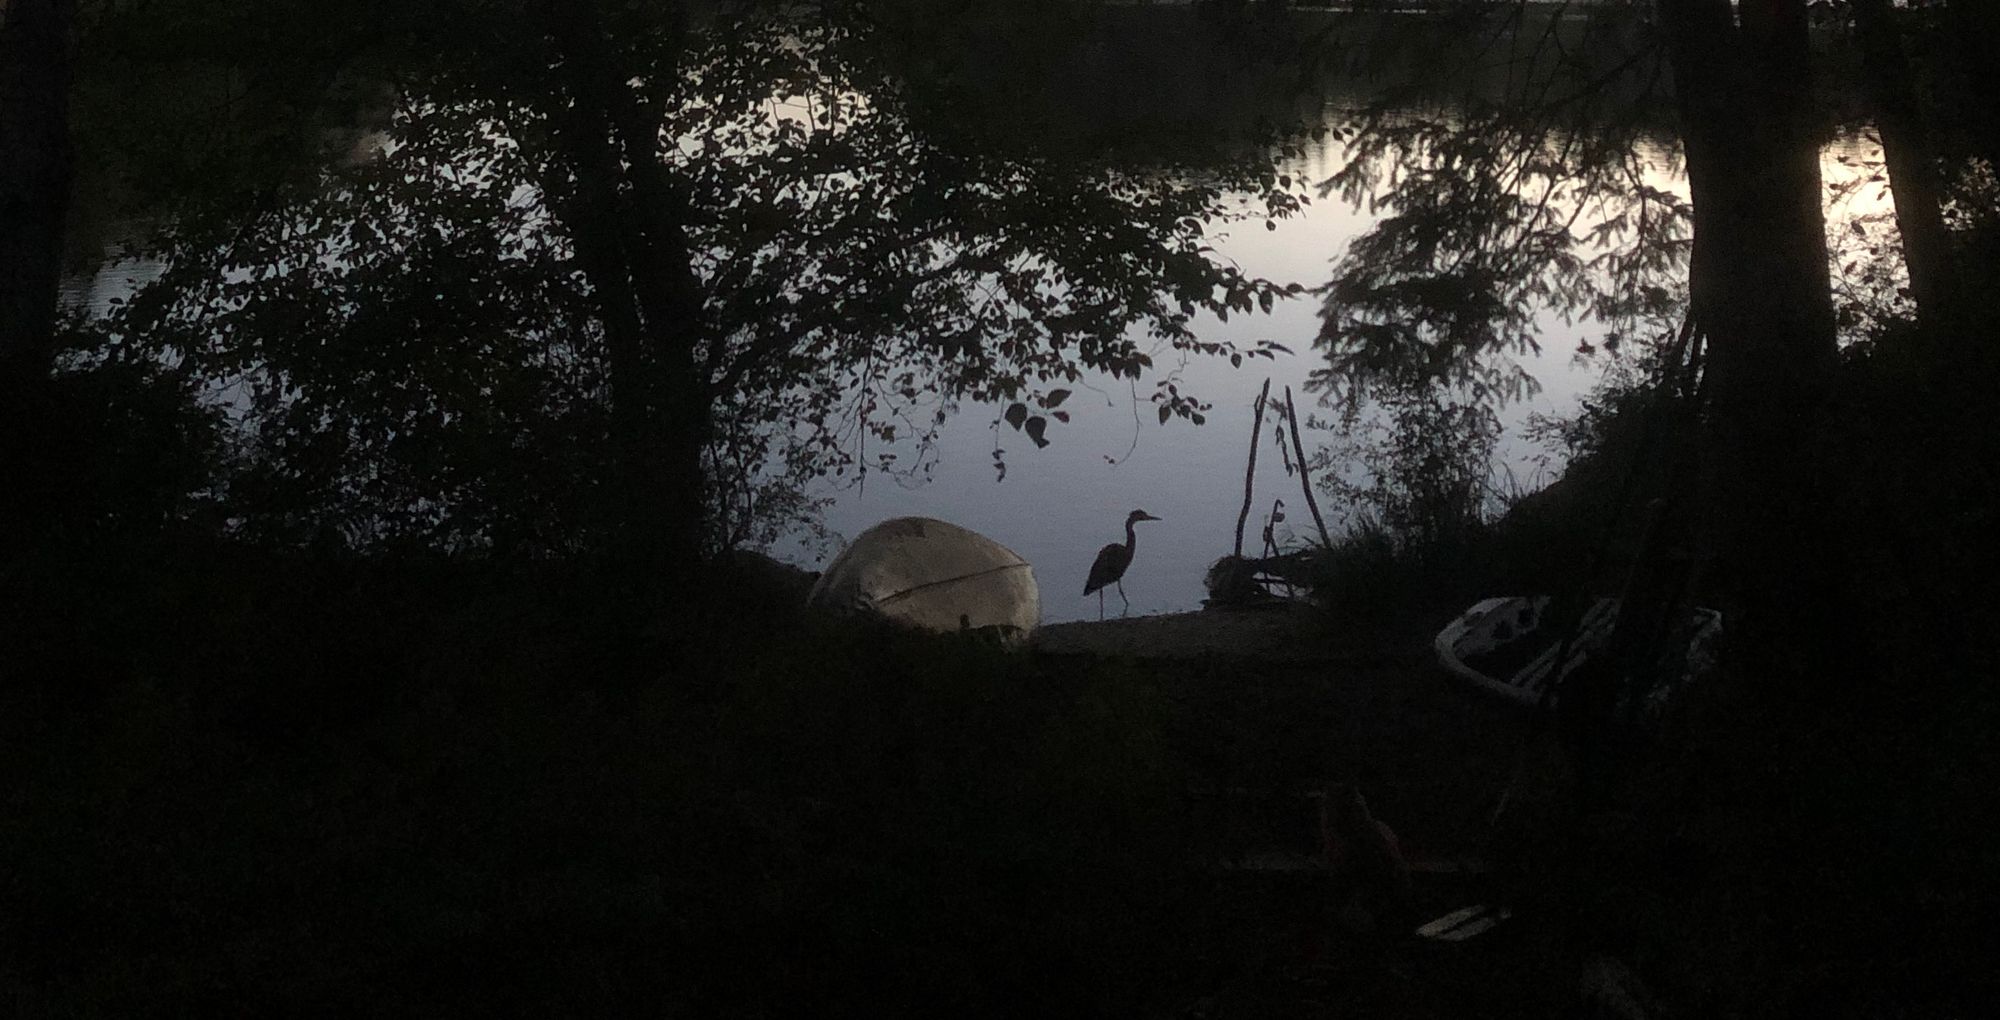 A great blue heron is silhouetted against a body of water and surrounded by trees in early dawn light.